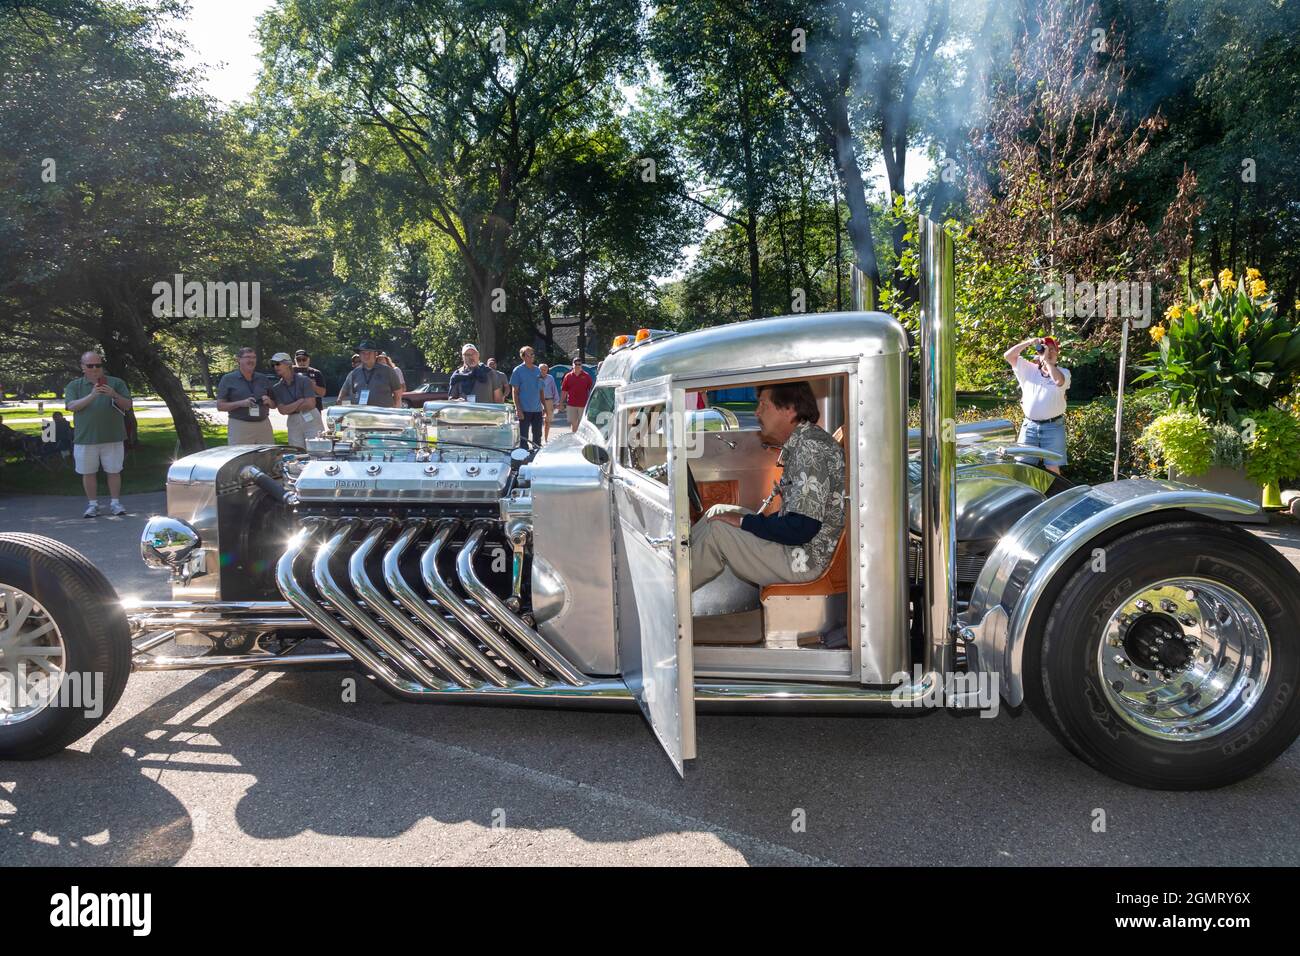 Grosse Pointe Shores, Michigan - Piss'd Off Pete, a vehicle built by designer and artist Randy Grubb at the Eyes on Design auto show. Grubb revs up th Stock Photo